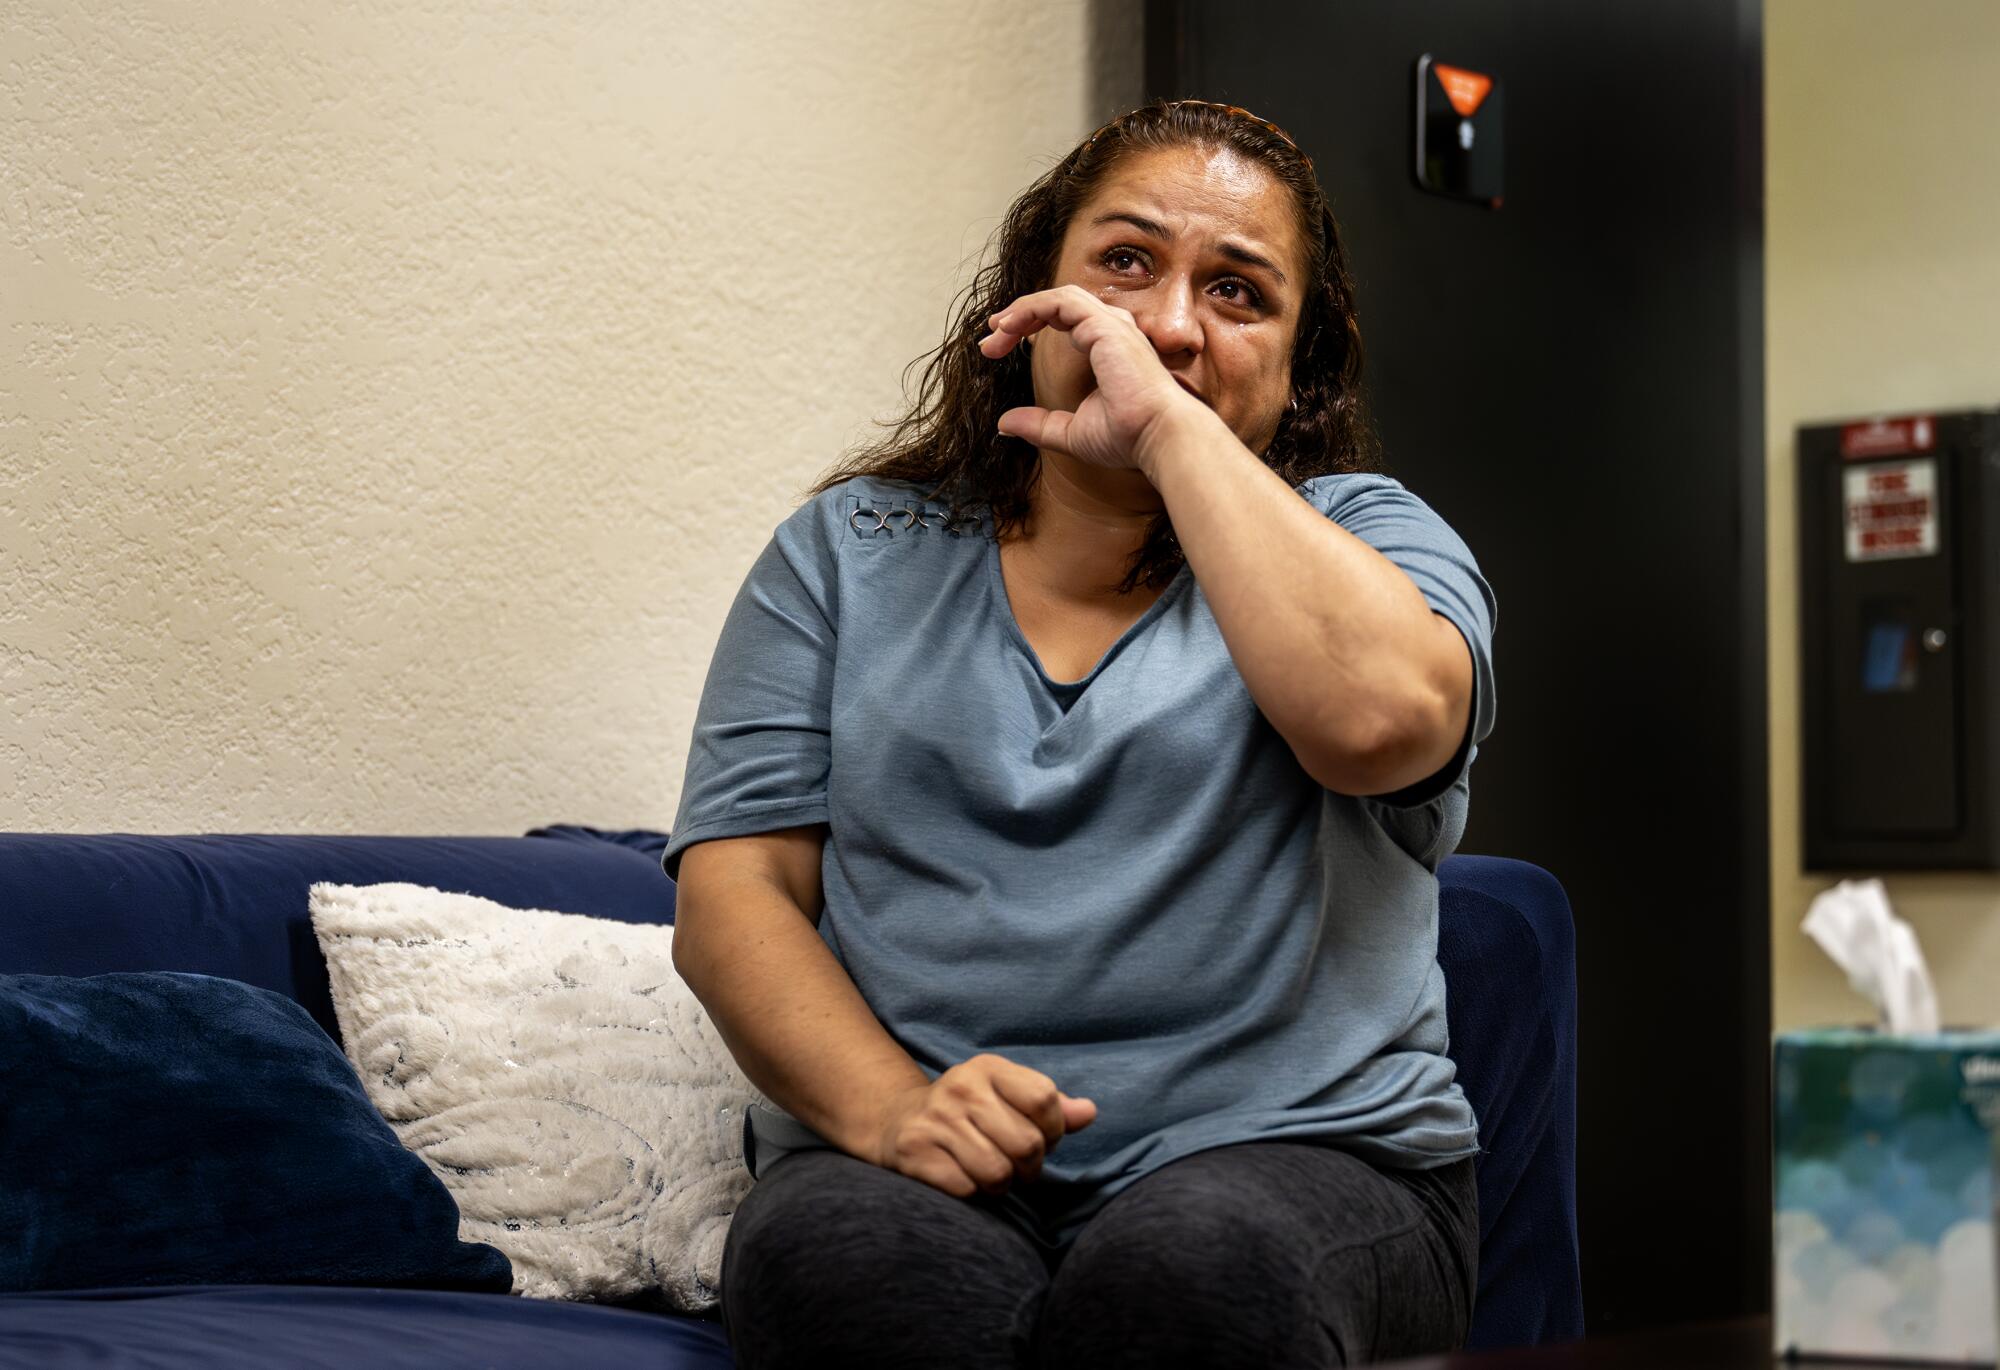 Nerry Montes is brought to tears as she sits on a couch.